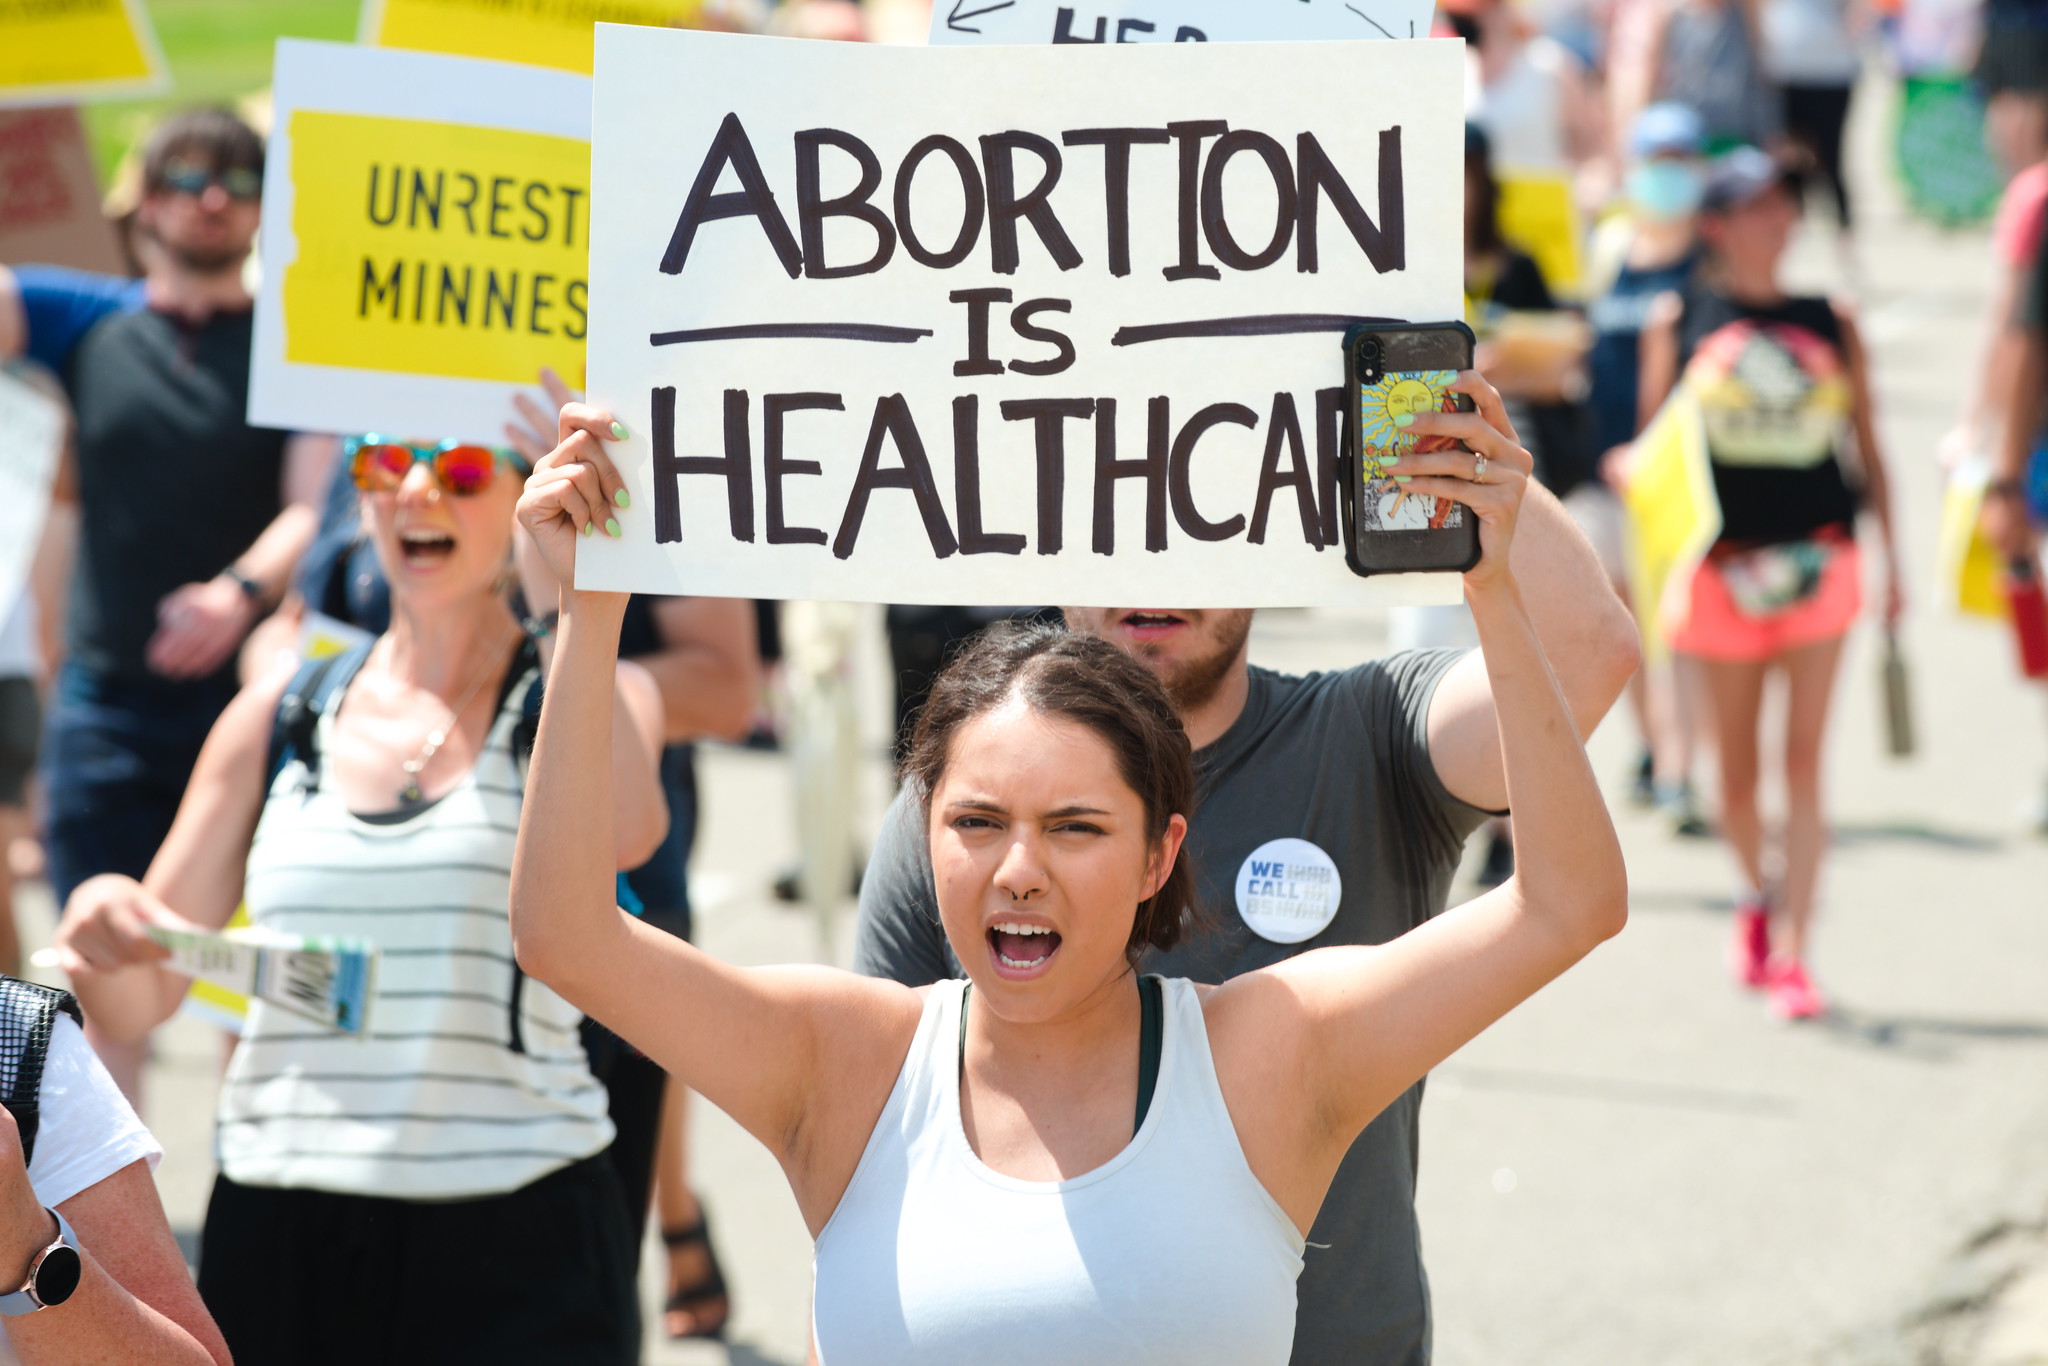 Republicans can win over unmarried women by exposing democrats’ abortion extremism